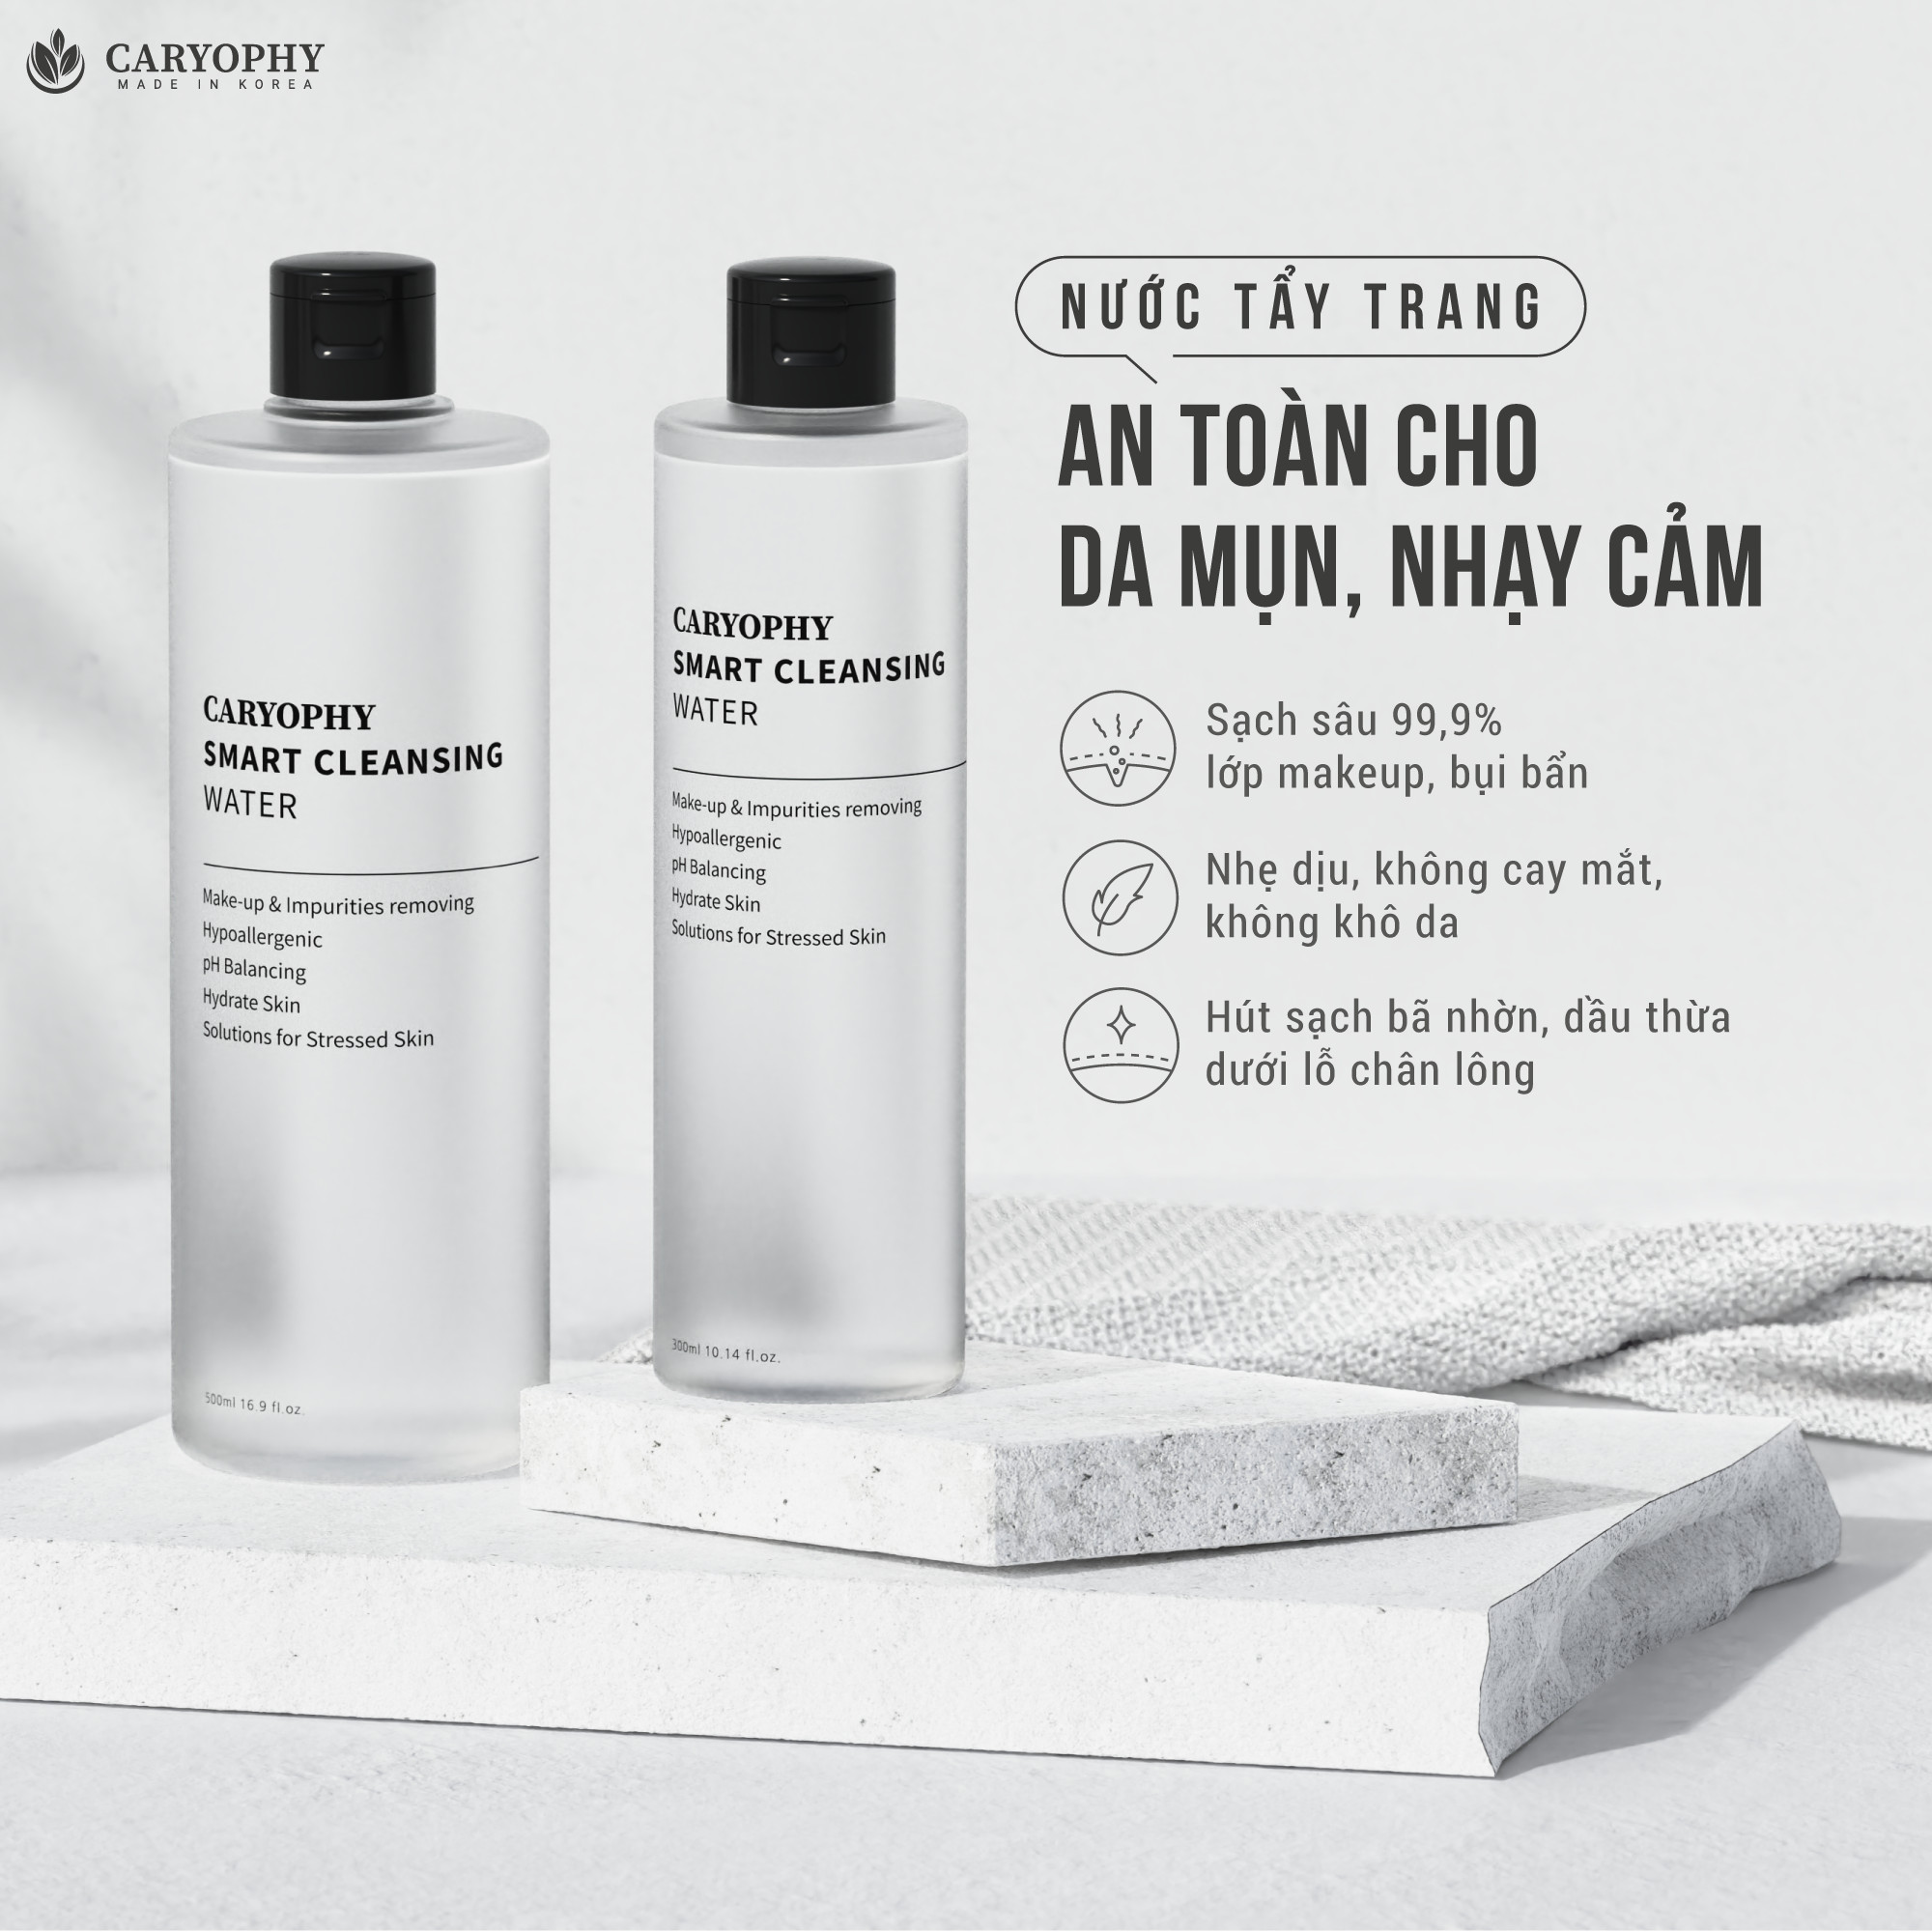 caryophy-smart-cleansing-water